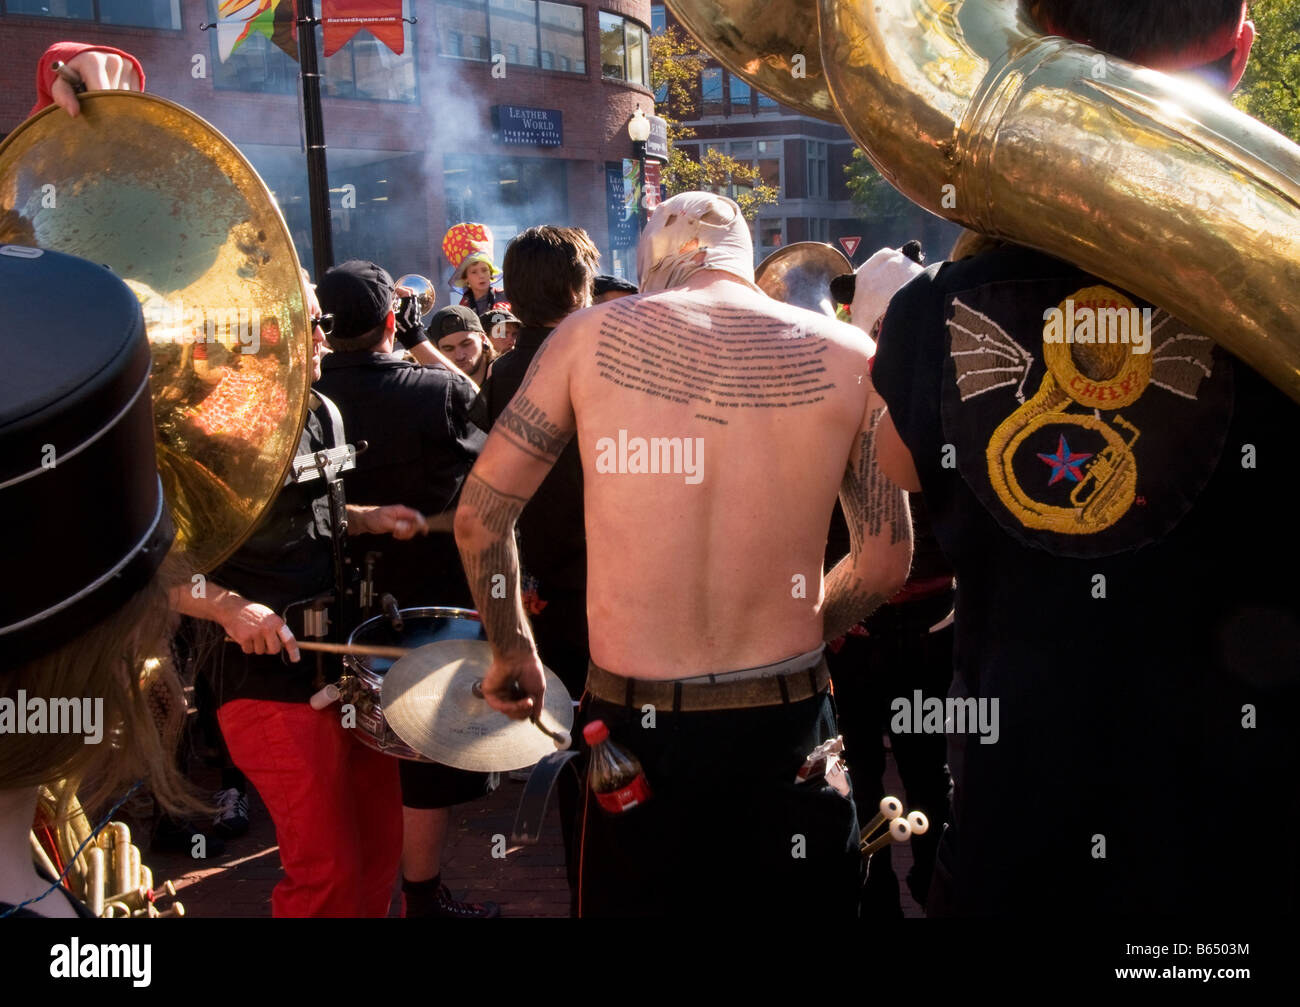 The tattooed drummer: Heavily tattooed street musician performing for the crowd during Oktoberfest festivities, Stock Photo